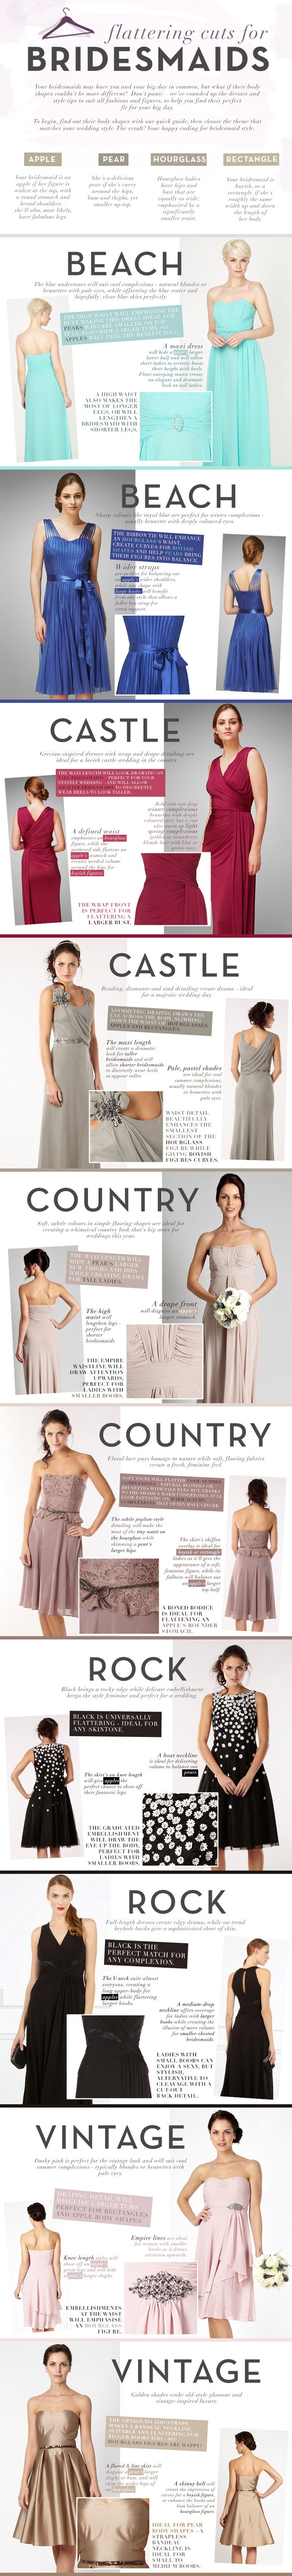 Flattering Cuts for Bridesmaids | Infographic by  Debenhams